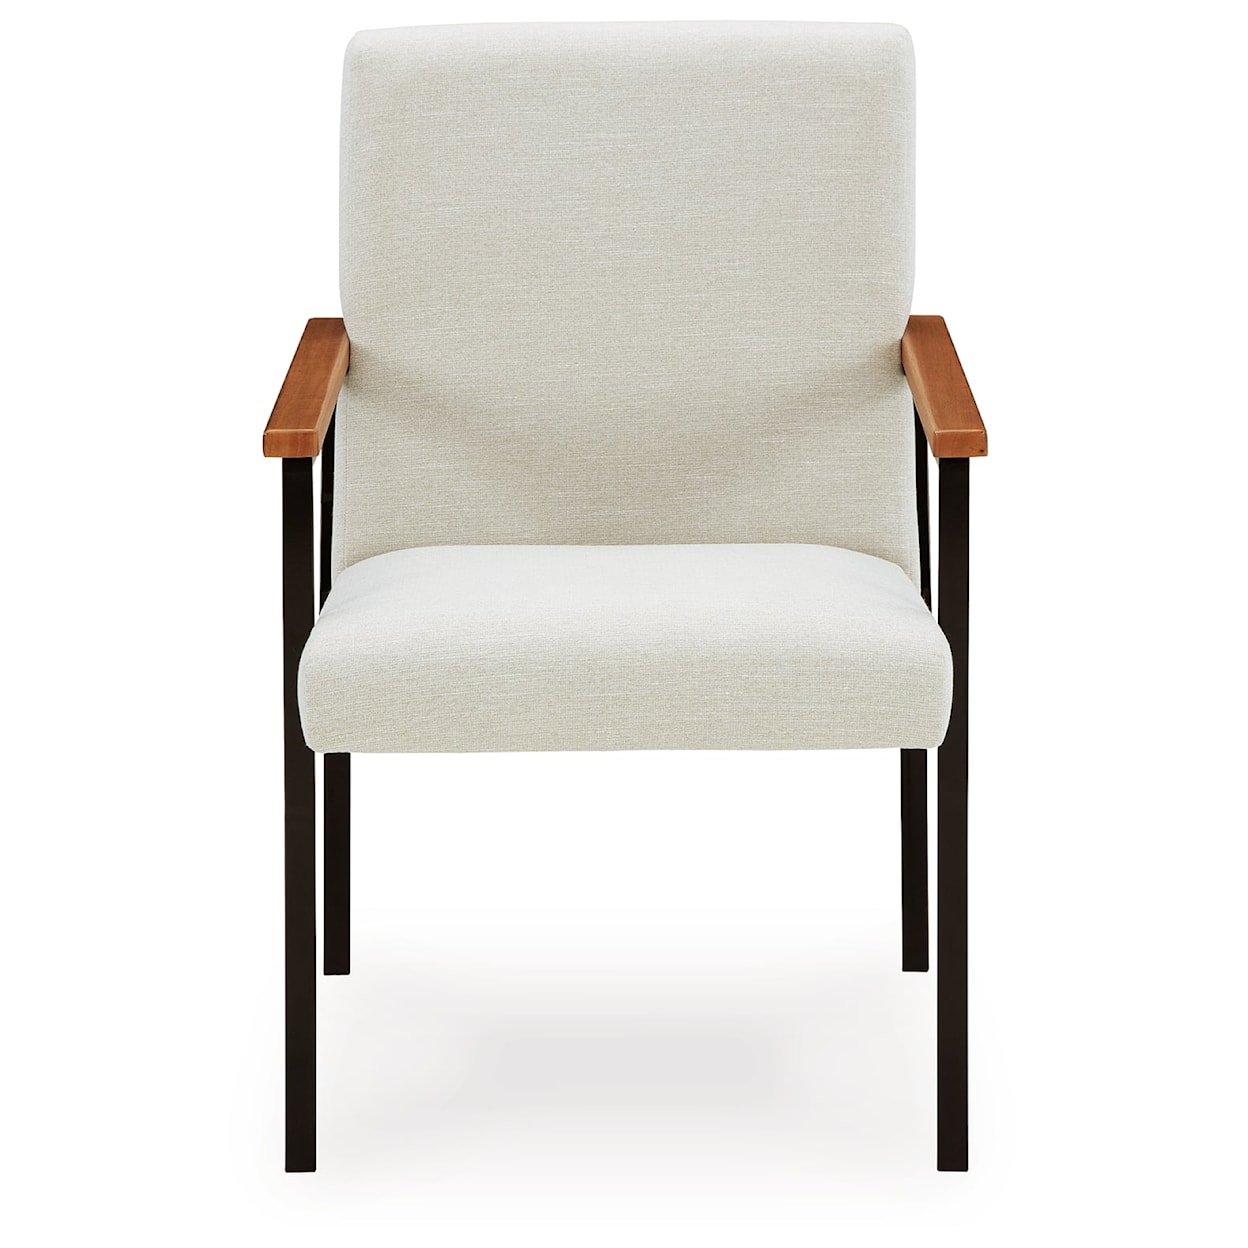 Signature Design by Ashley Dressonni Dining Upholstered Arm Chair